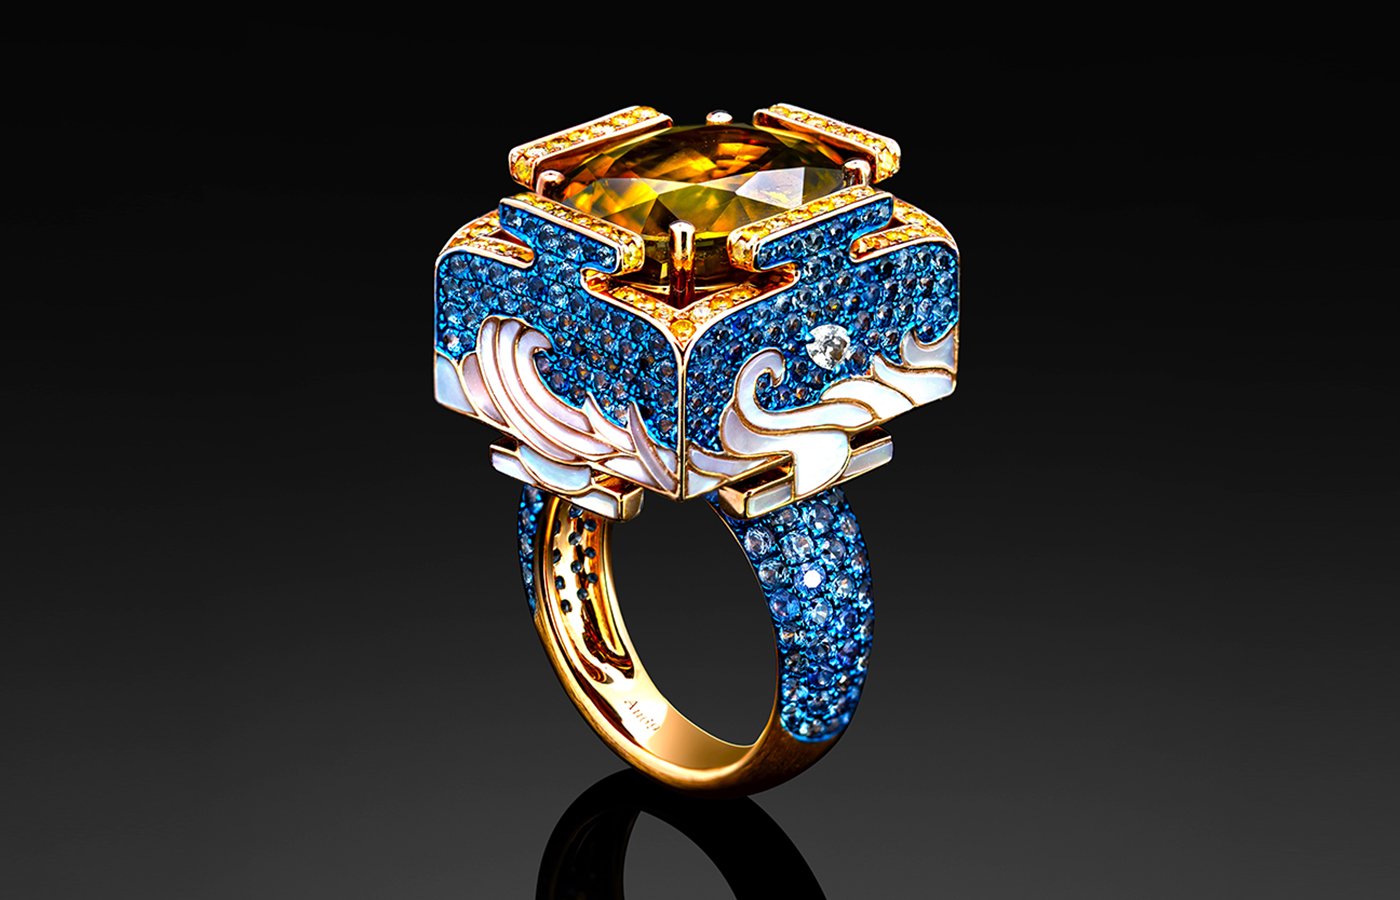 Austy Lee Holywater Flagon ring in rose gold with Sri-lankan sphene, blue sapphires, mother-of-pearl, fancy vivid yellow diamond and diamond from the Sanctus-Cubus collection